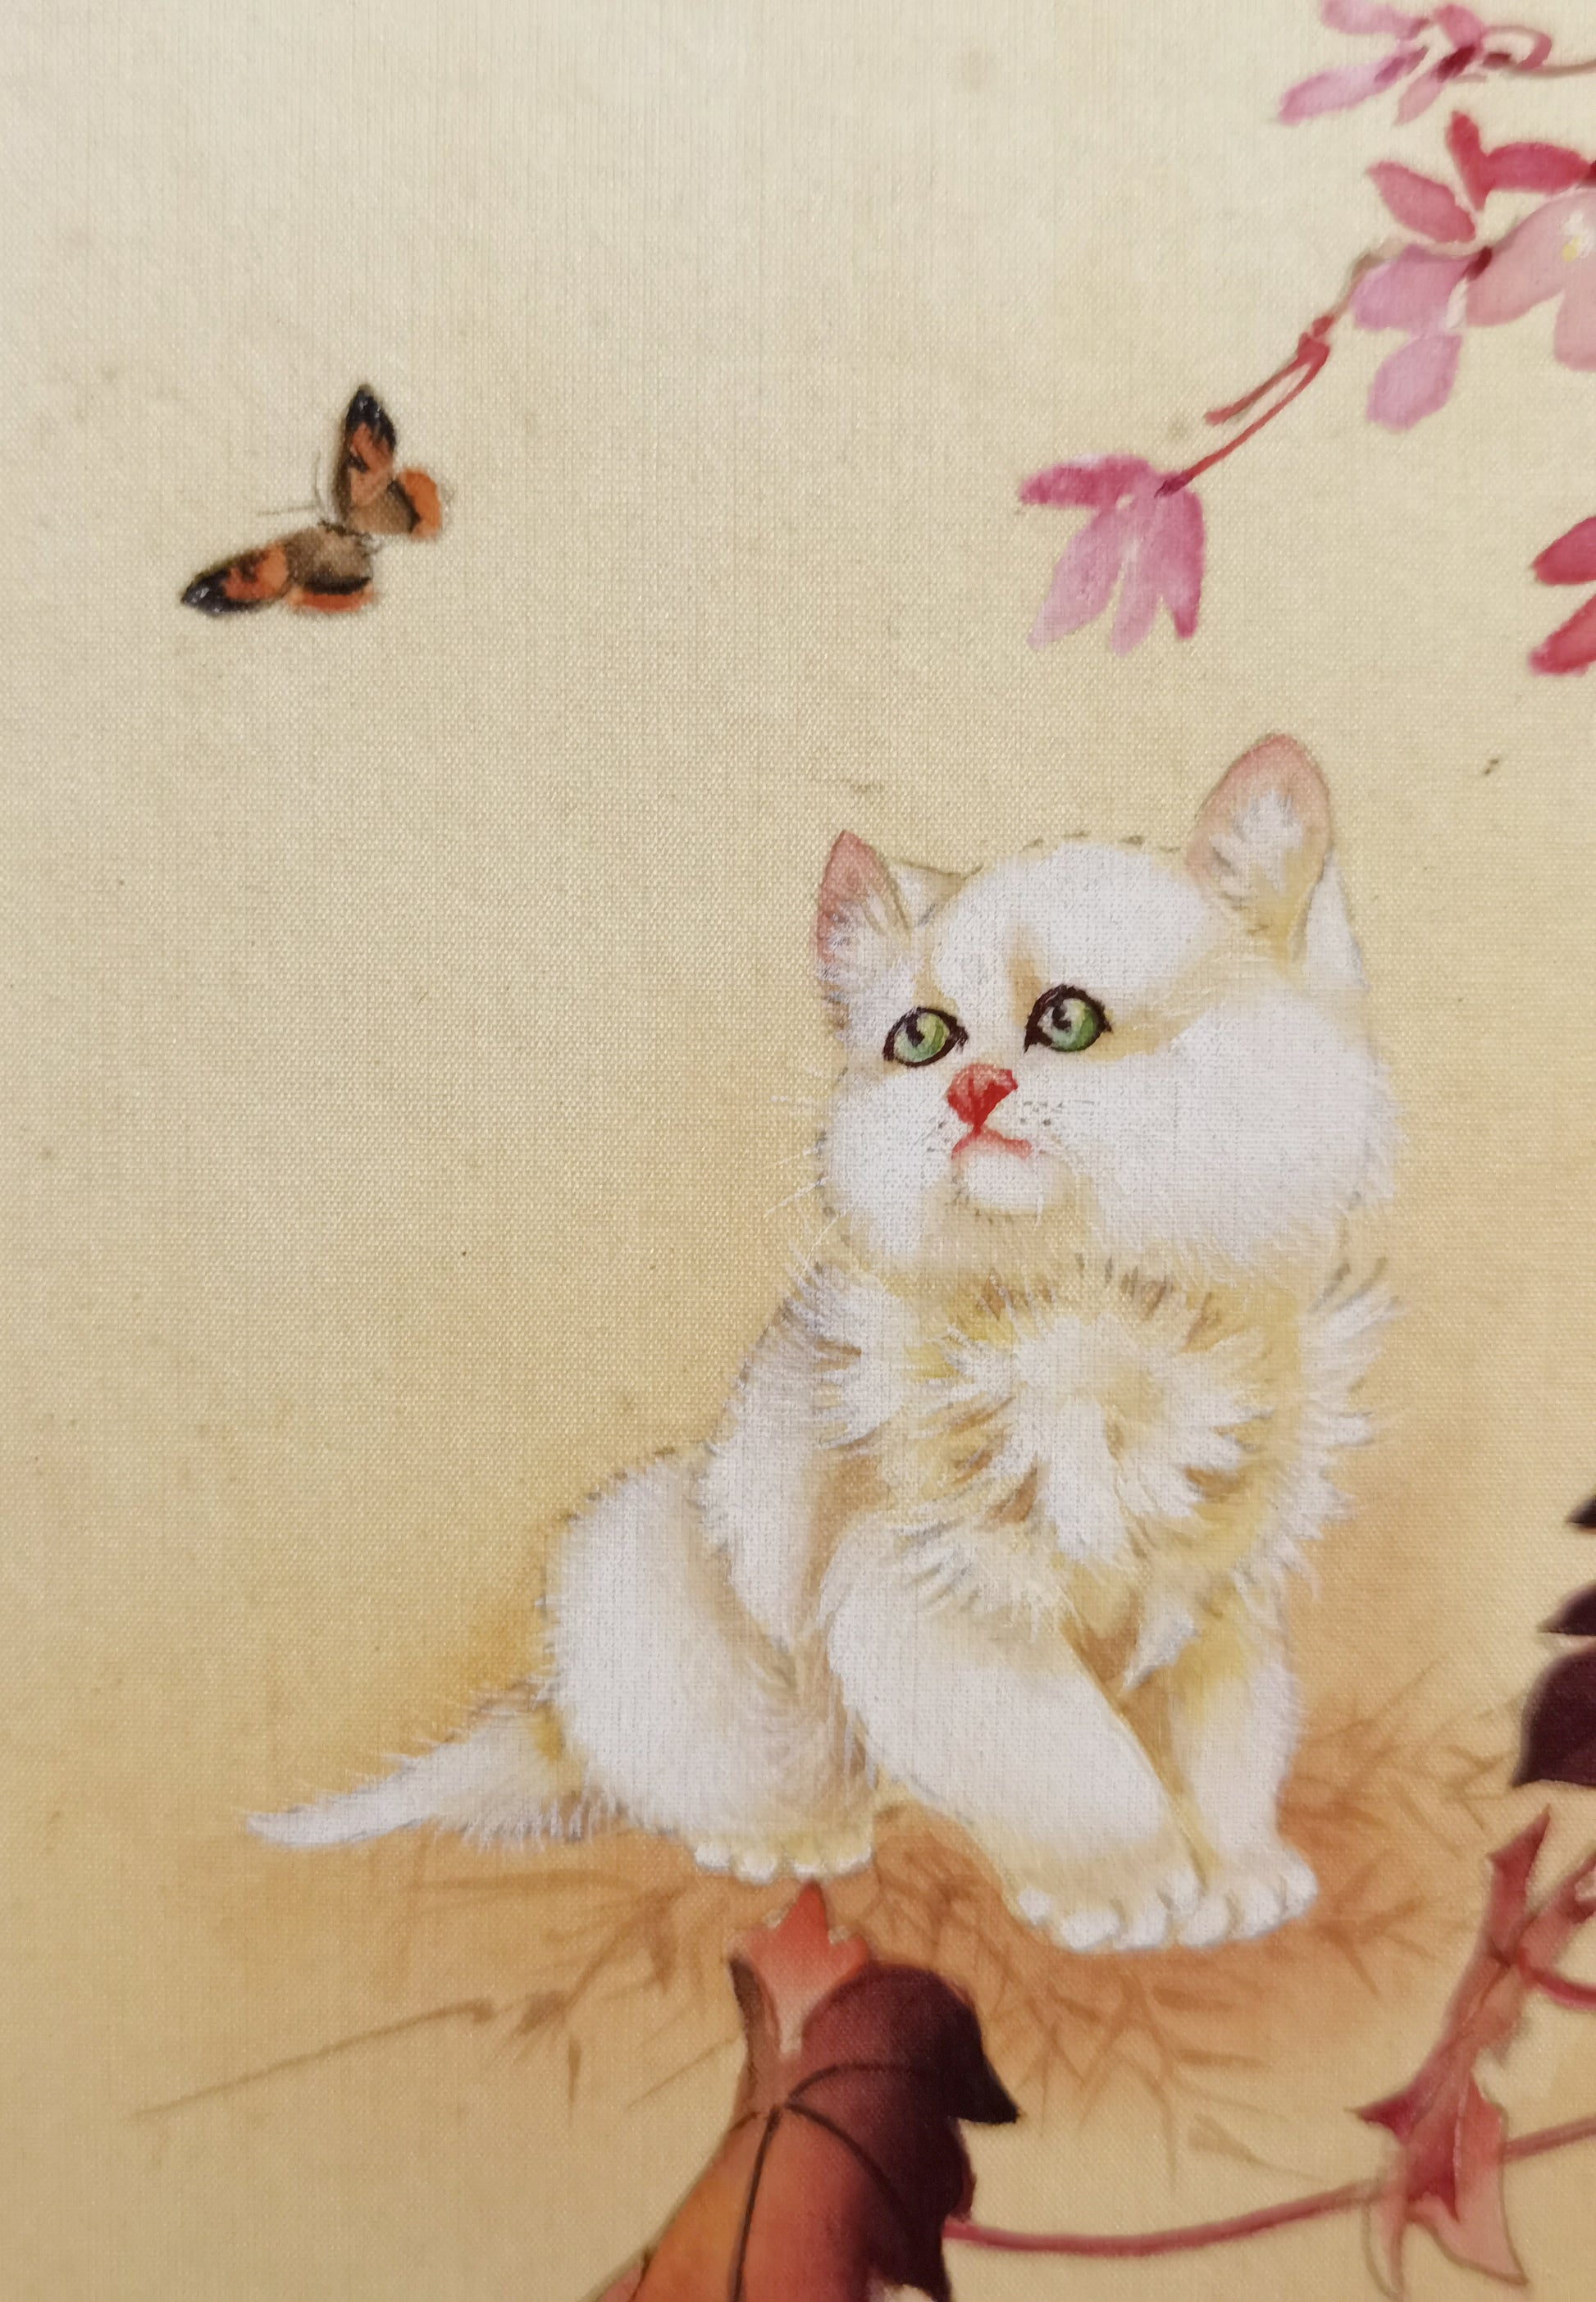 White Cat & Butterflies Perception Handmade Art Printing Animal Insects Plants Cute and Silly with Wood Frame